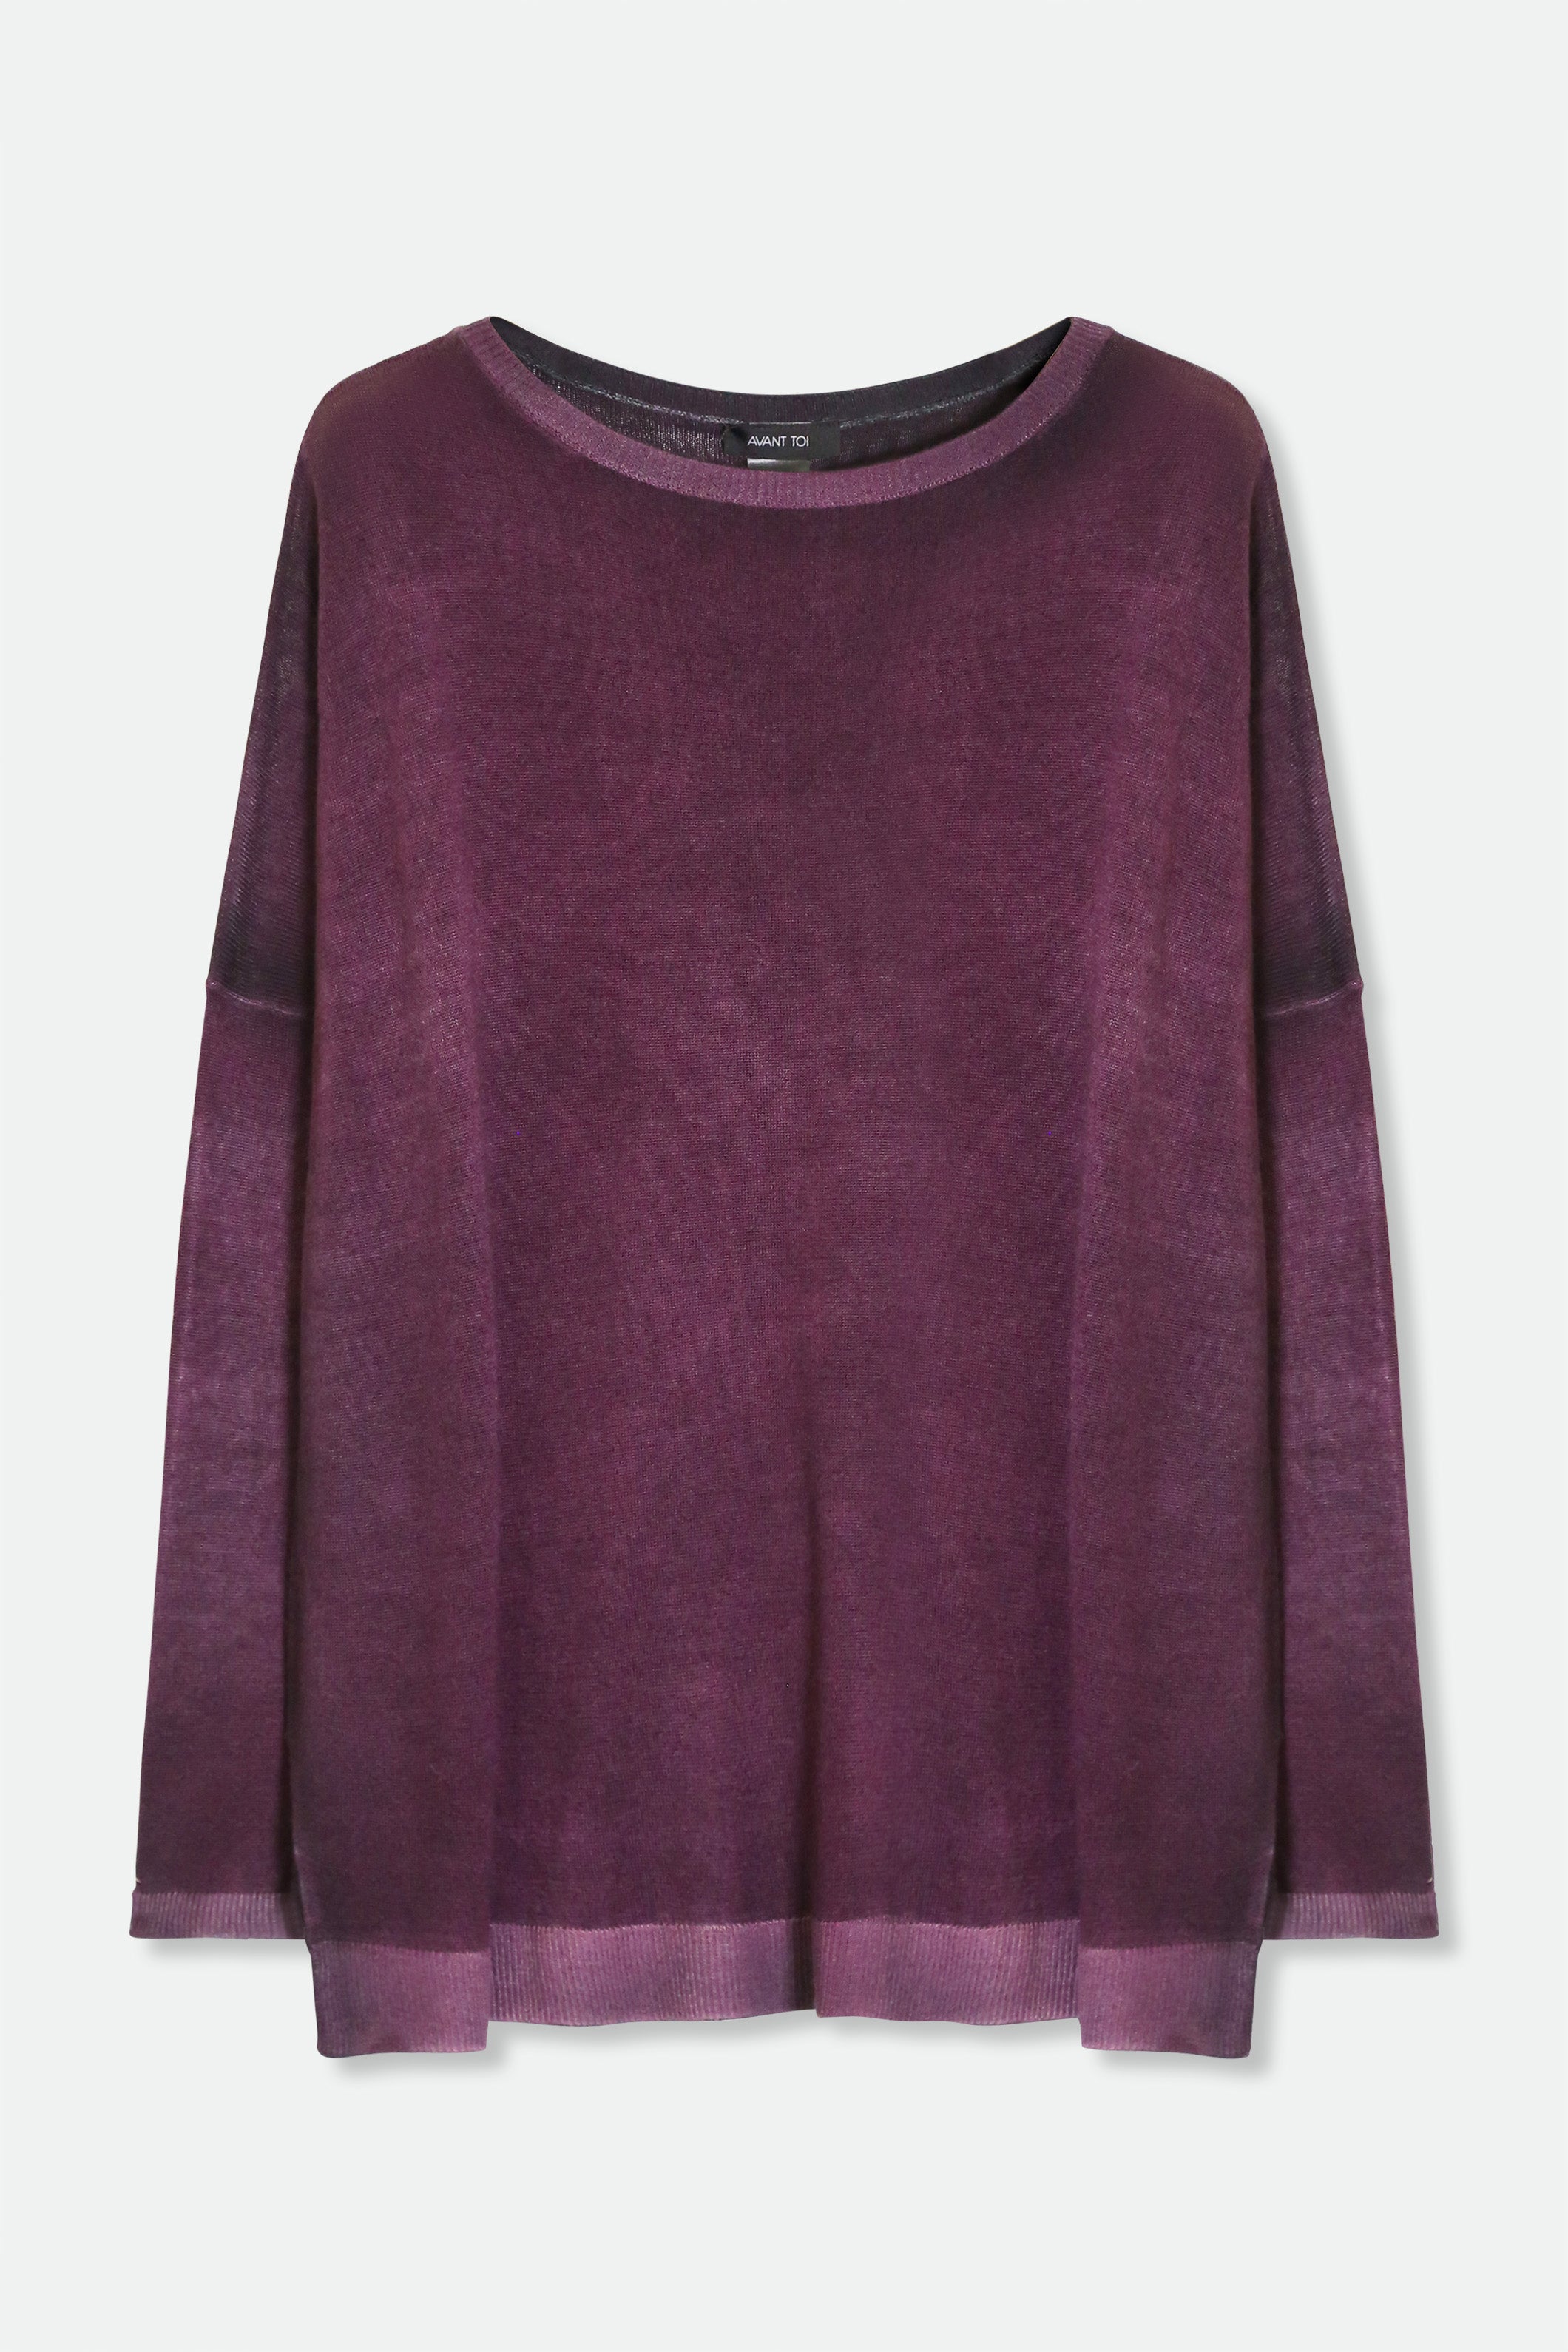 AVANT TOI HAND-DYED KNITTED PULLOVER Aubergine - Jarbo